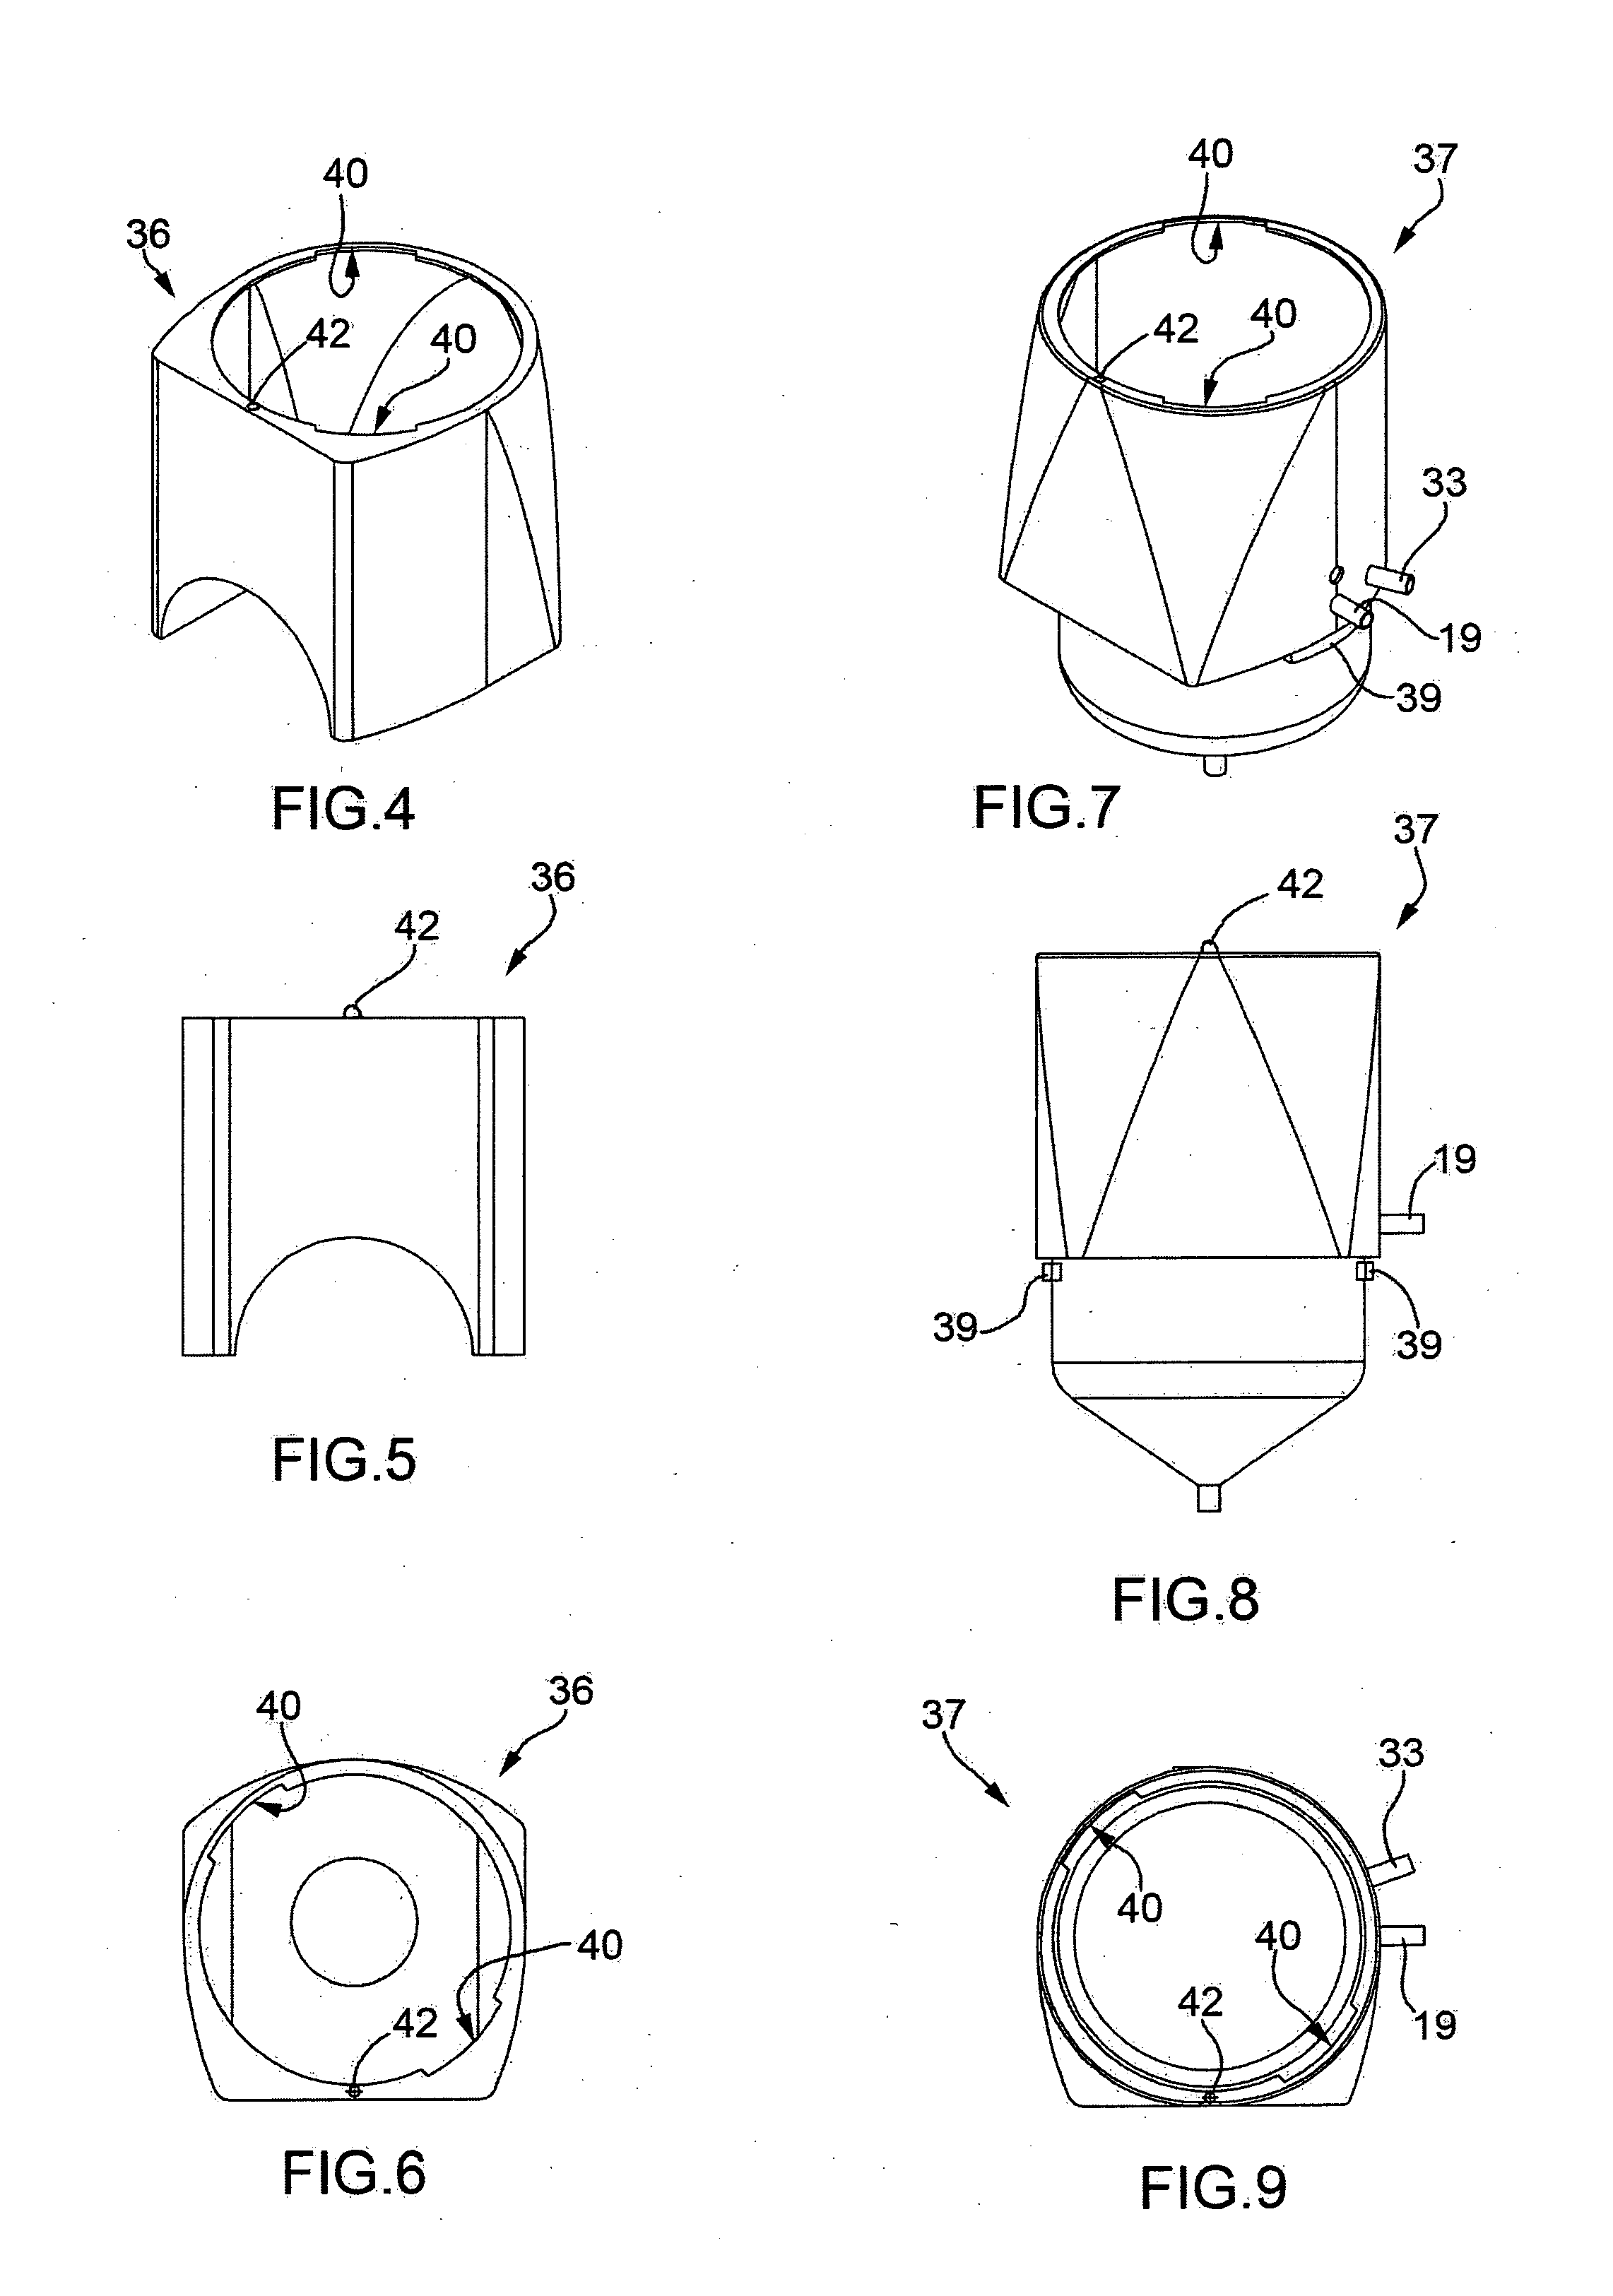 Method and device for dissolving solid substances in water